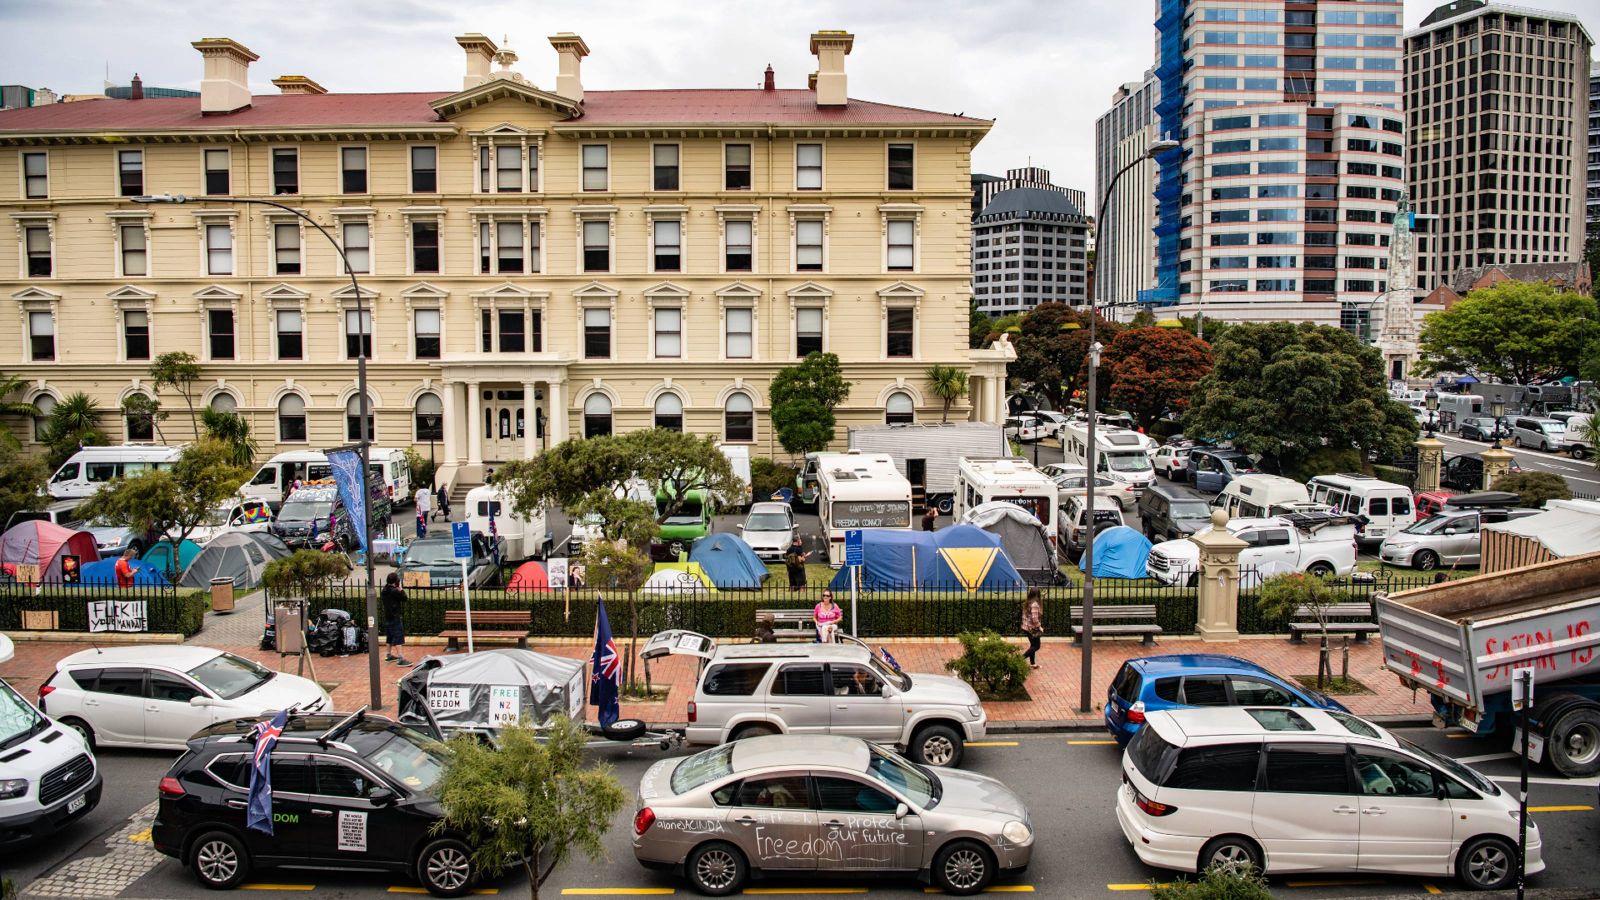 Protestors’ tents and vehicles on the grounds of the Old Government Buildings.